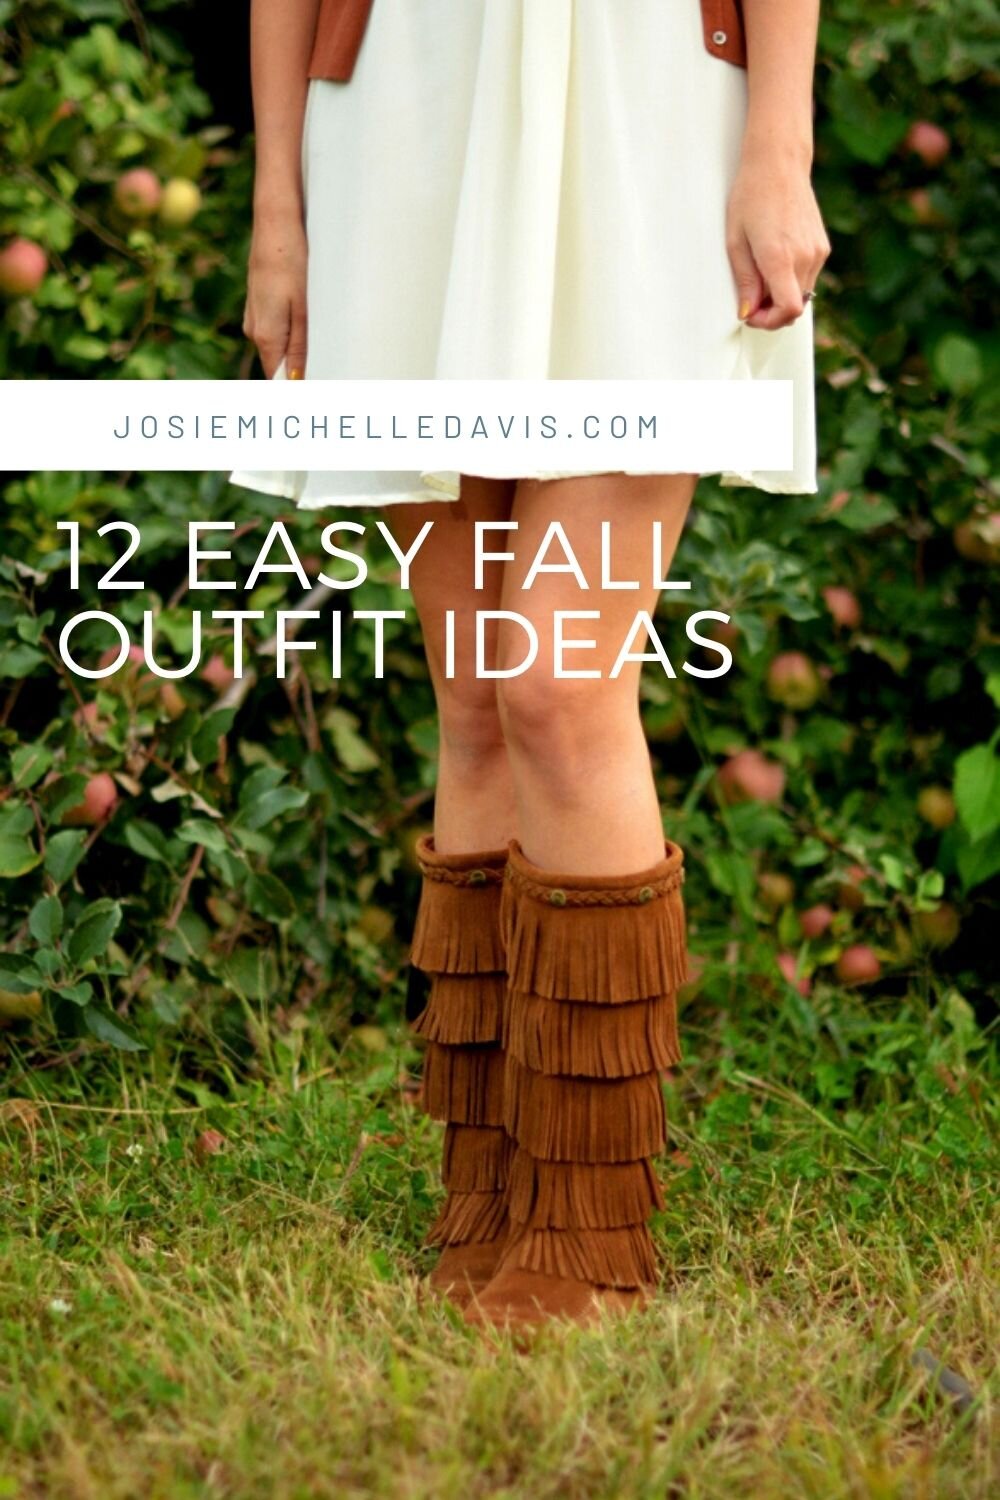 12 Easy Outfit Ideas for Fall